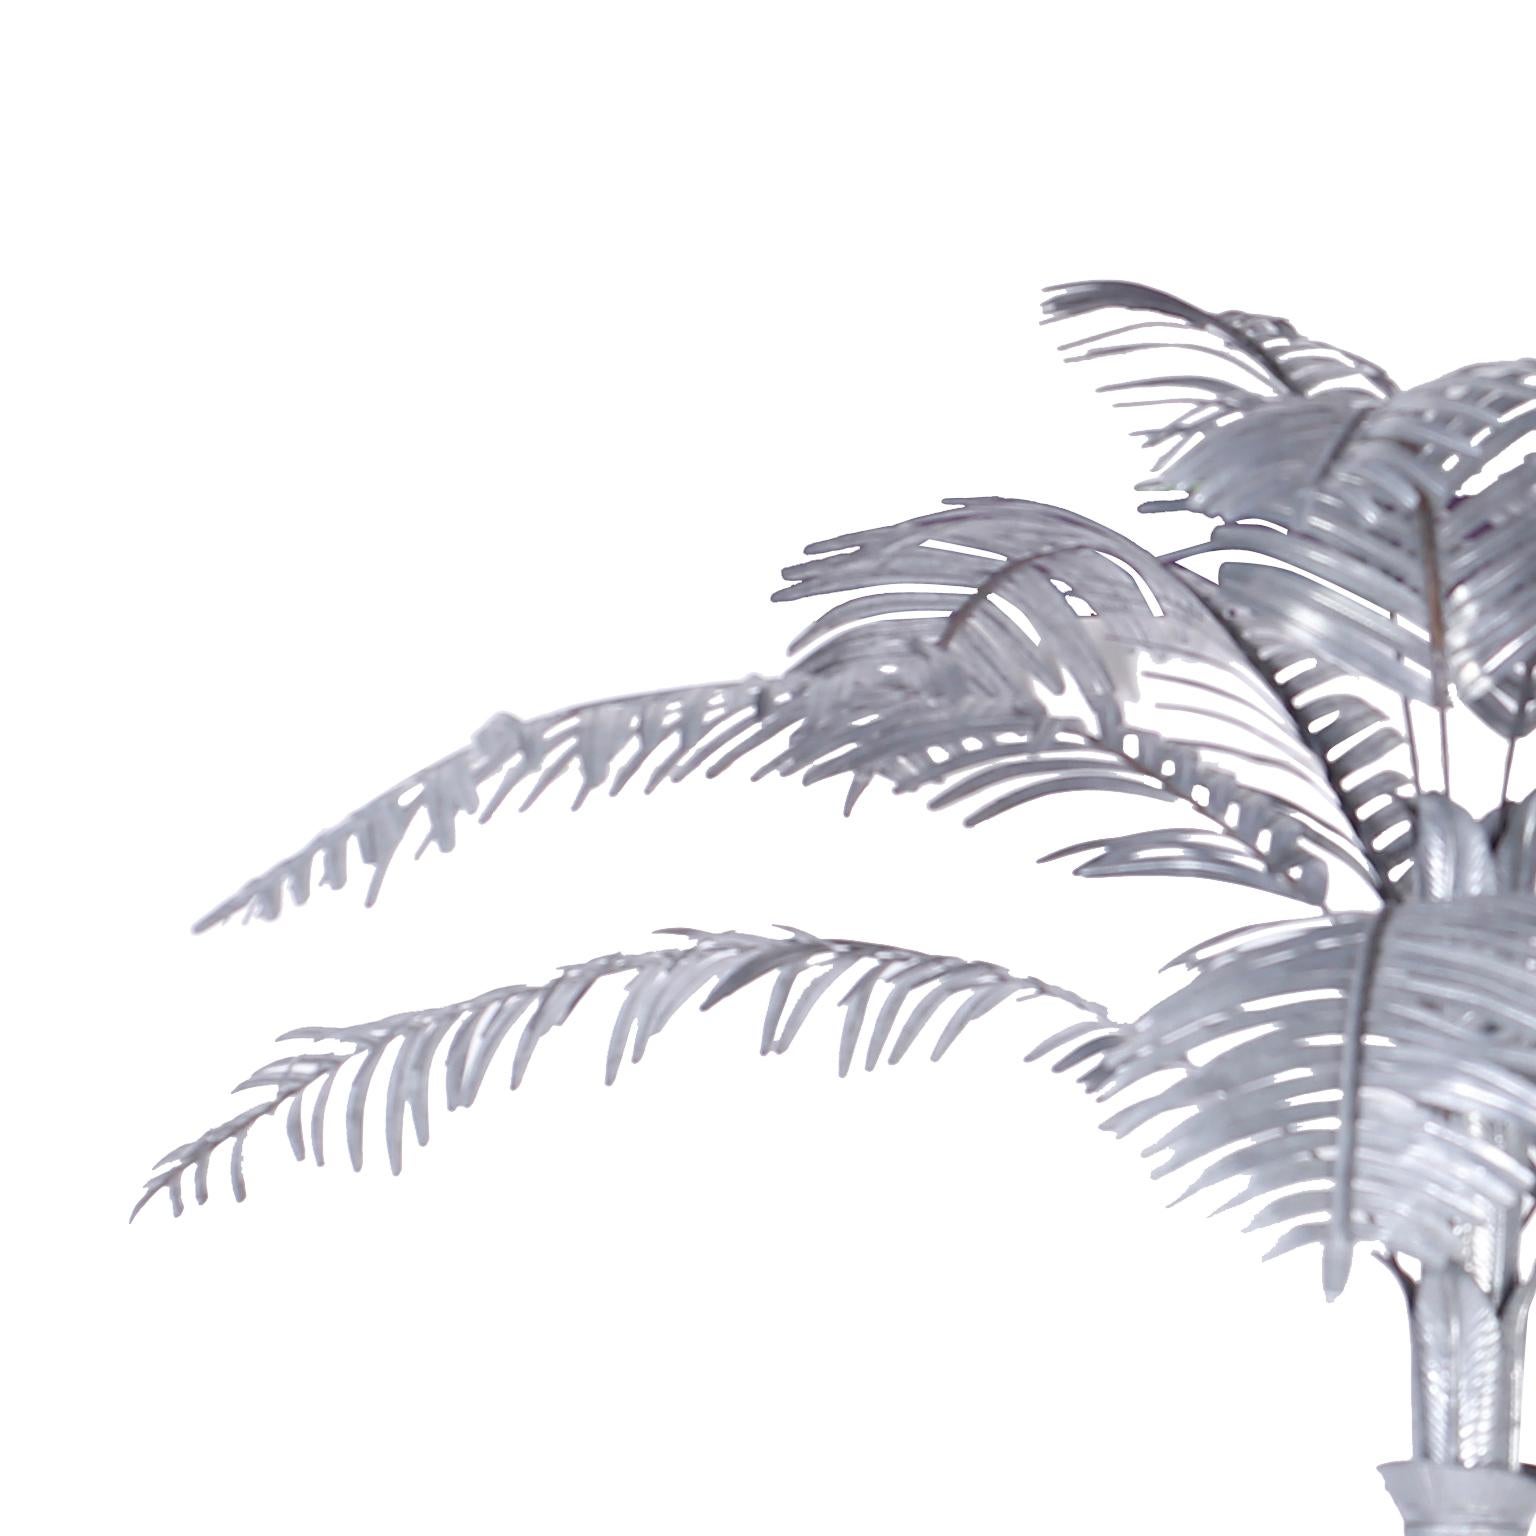 An impressive life-size palm tree sculpture crafted in galvanized metal with twelve removable palm fronds, stylized trunk, and a round weighted base.